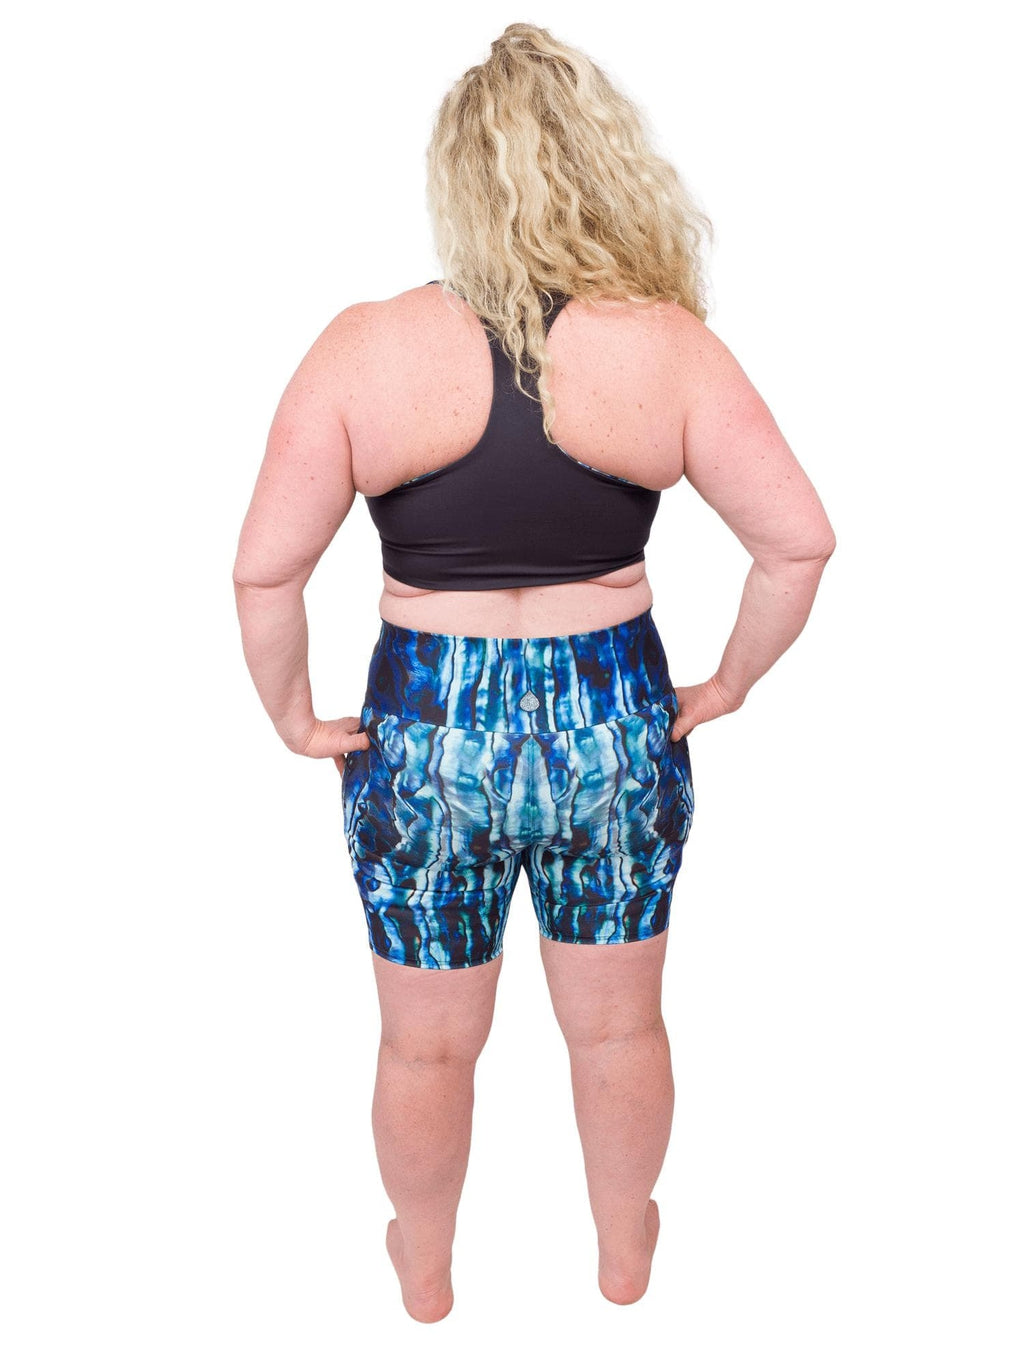 Model: Ruth volunteers for citizen science projects on both salt and freshwater fish and spends as much time as possible in, on, or under the water. She is 5&#39;7&quot;, 217 lbs, 40DD and is wearing a 2XL.